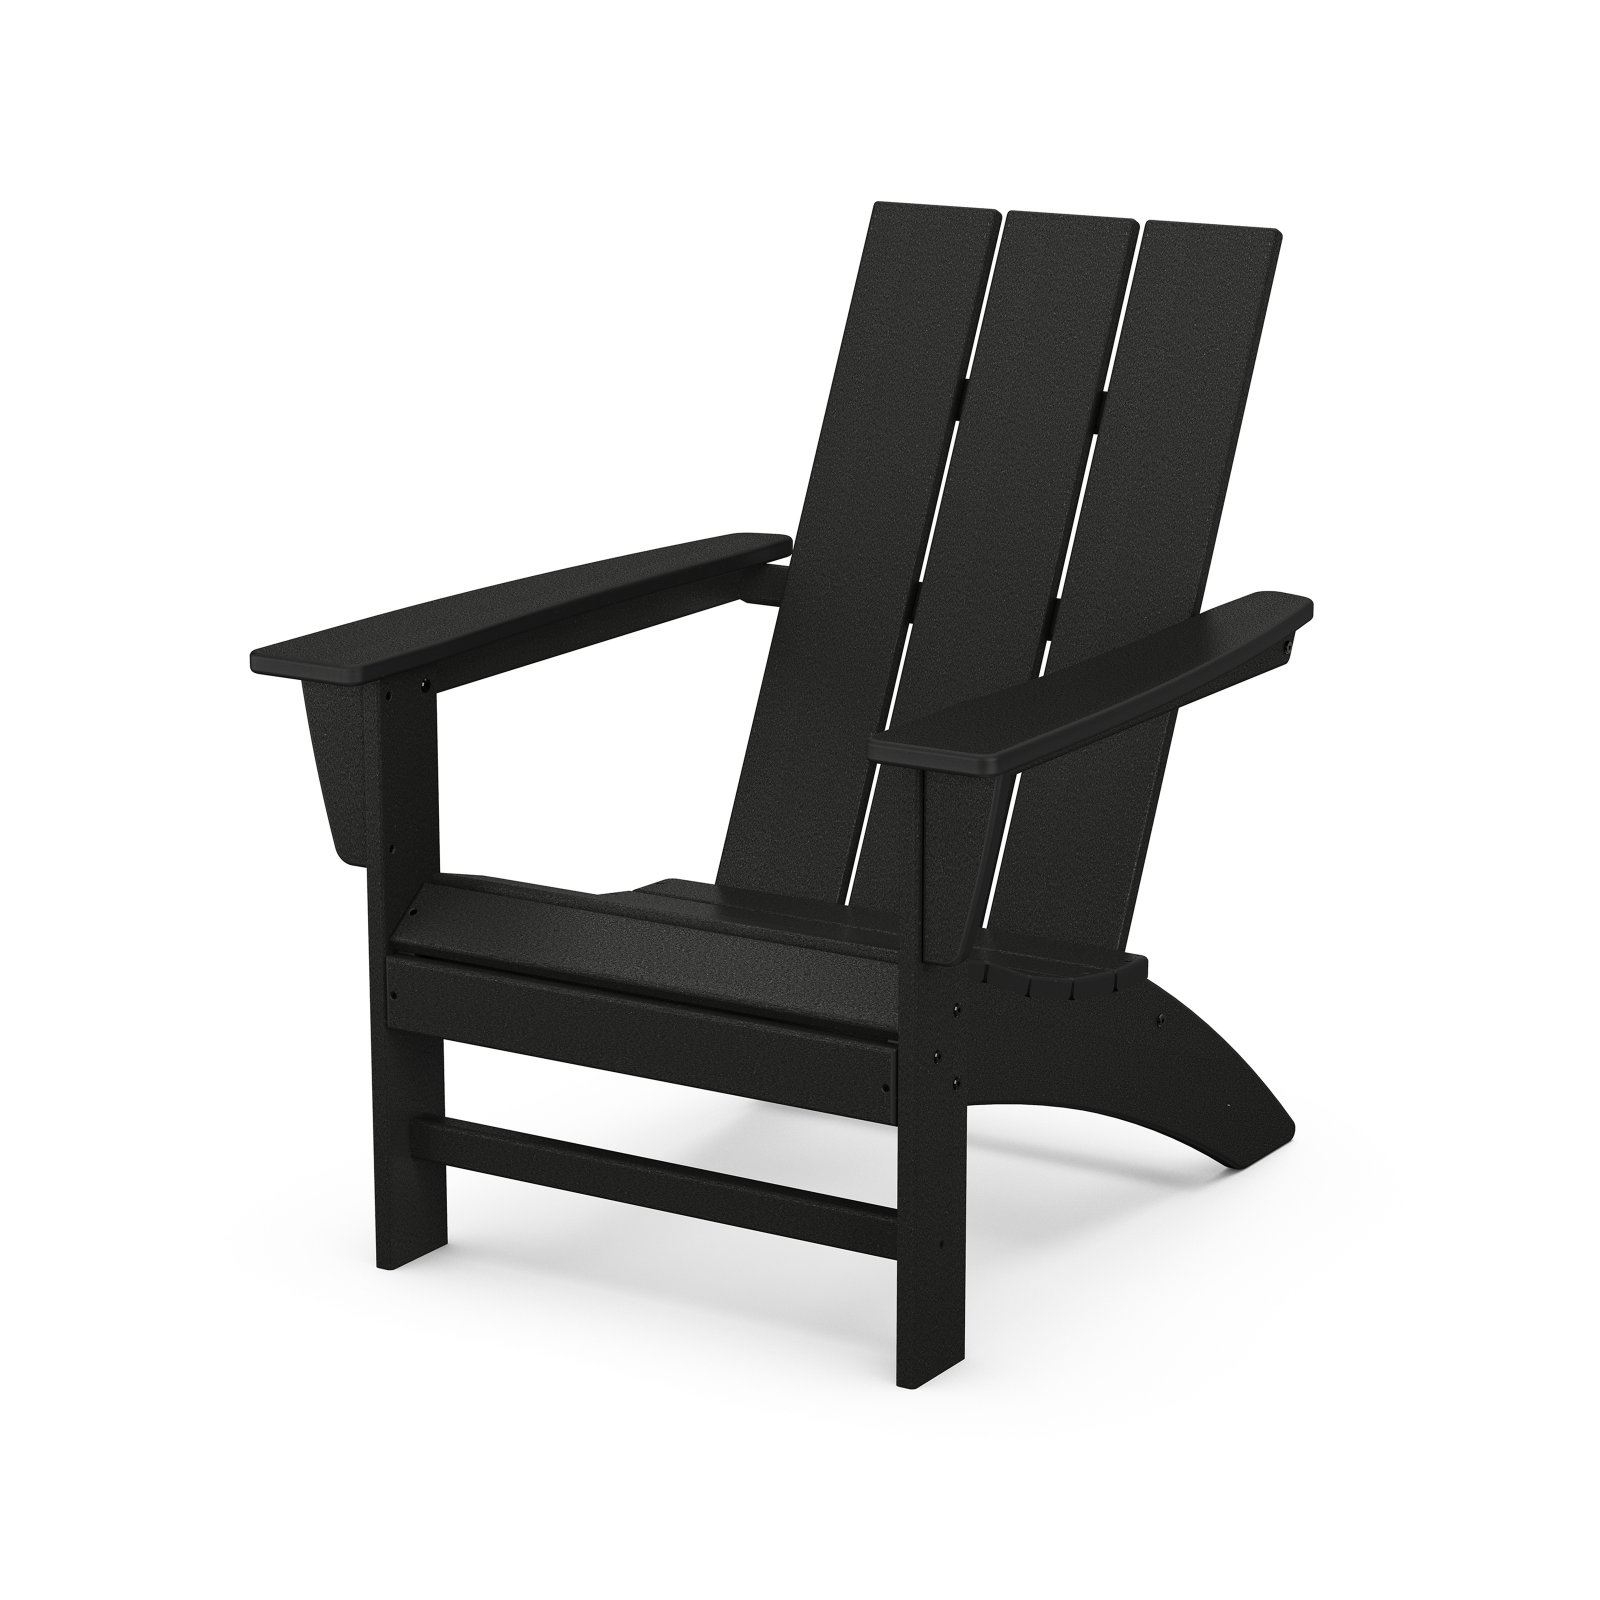 POLYWOODÂ® Modern Outdoor Adirondack Chair - image 1 of 4